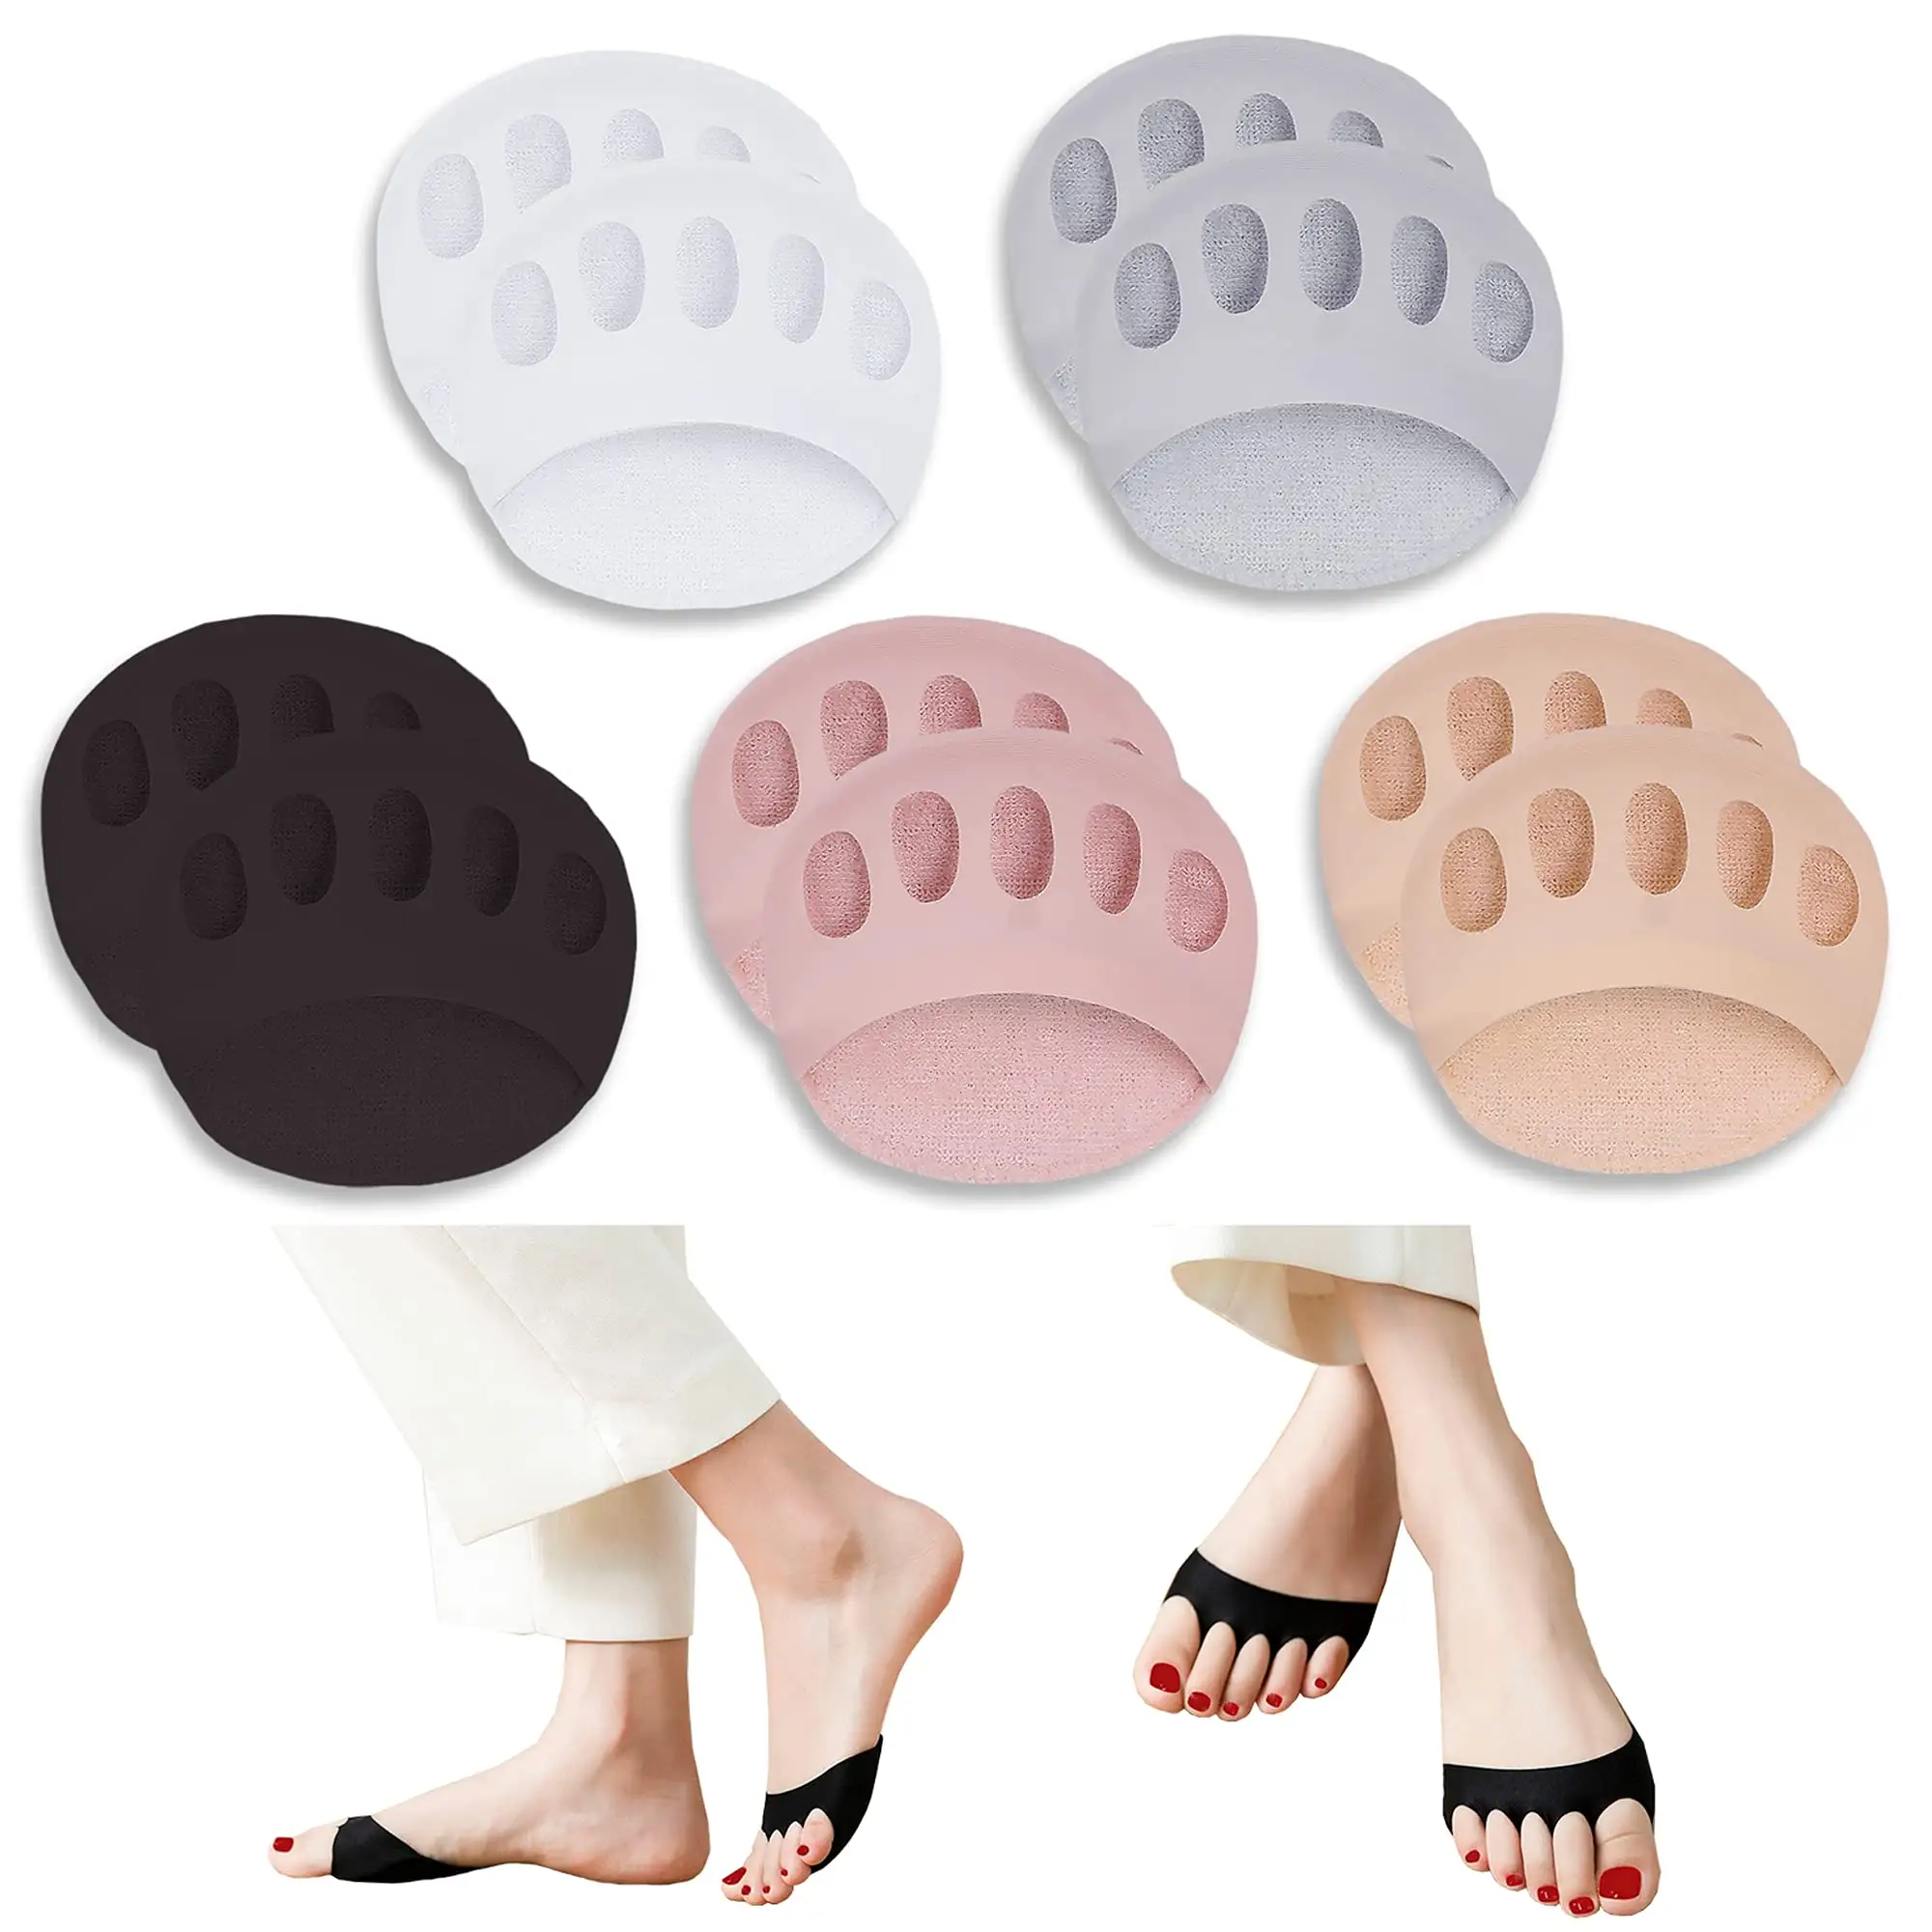 Five Toes Forefoot Pads For Women High Heels Half Insoles Foot Pain Care Toe Pad